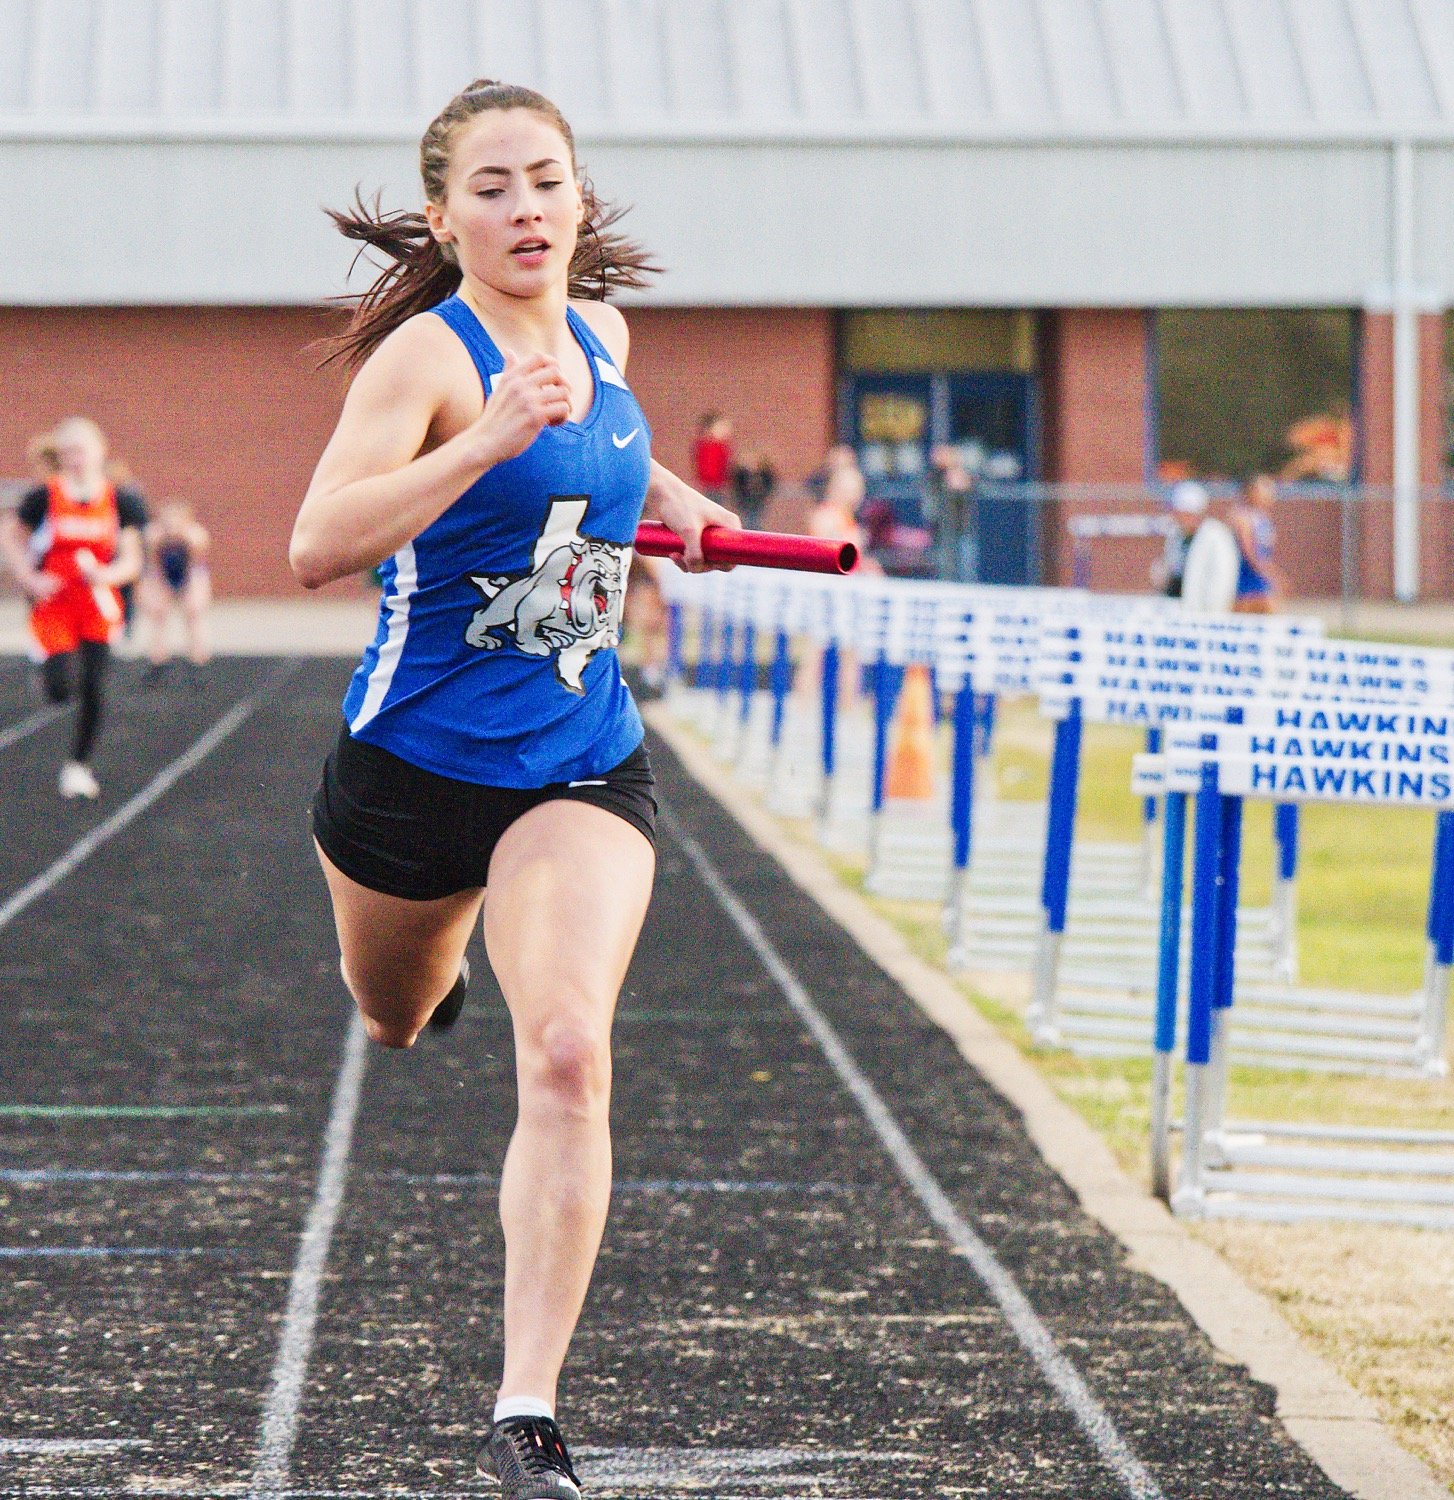 Brooklyn Marcee crosses the finish line in 3rd place for the Lady Bulldog 4x100m relay team. She won the long jump, pole vault, 100m hurdles and 300m hurdles, accounting for nearly half of Quitman's team points. [just a start - finish the album here]